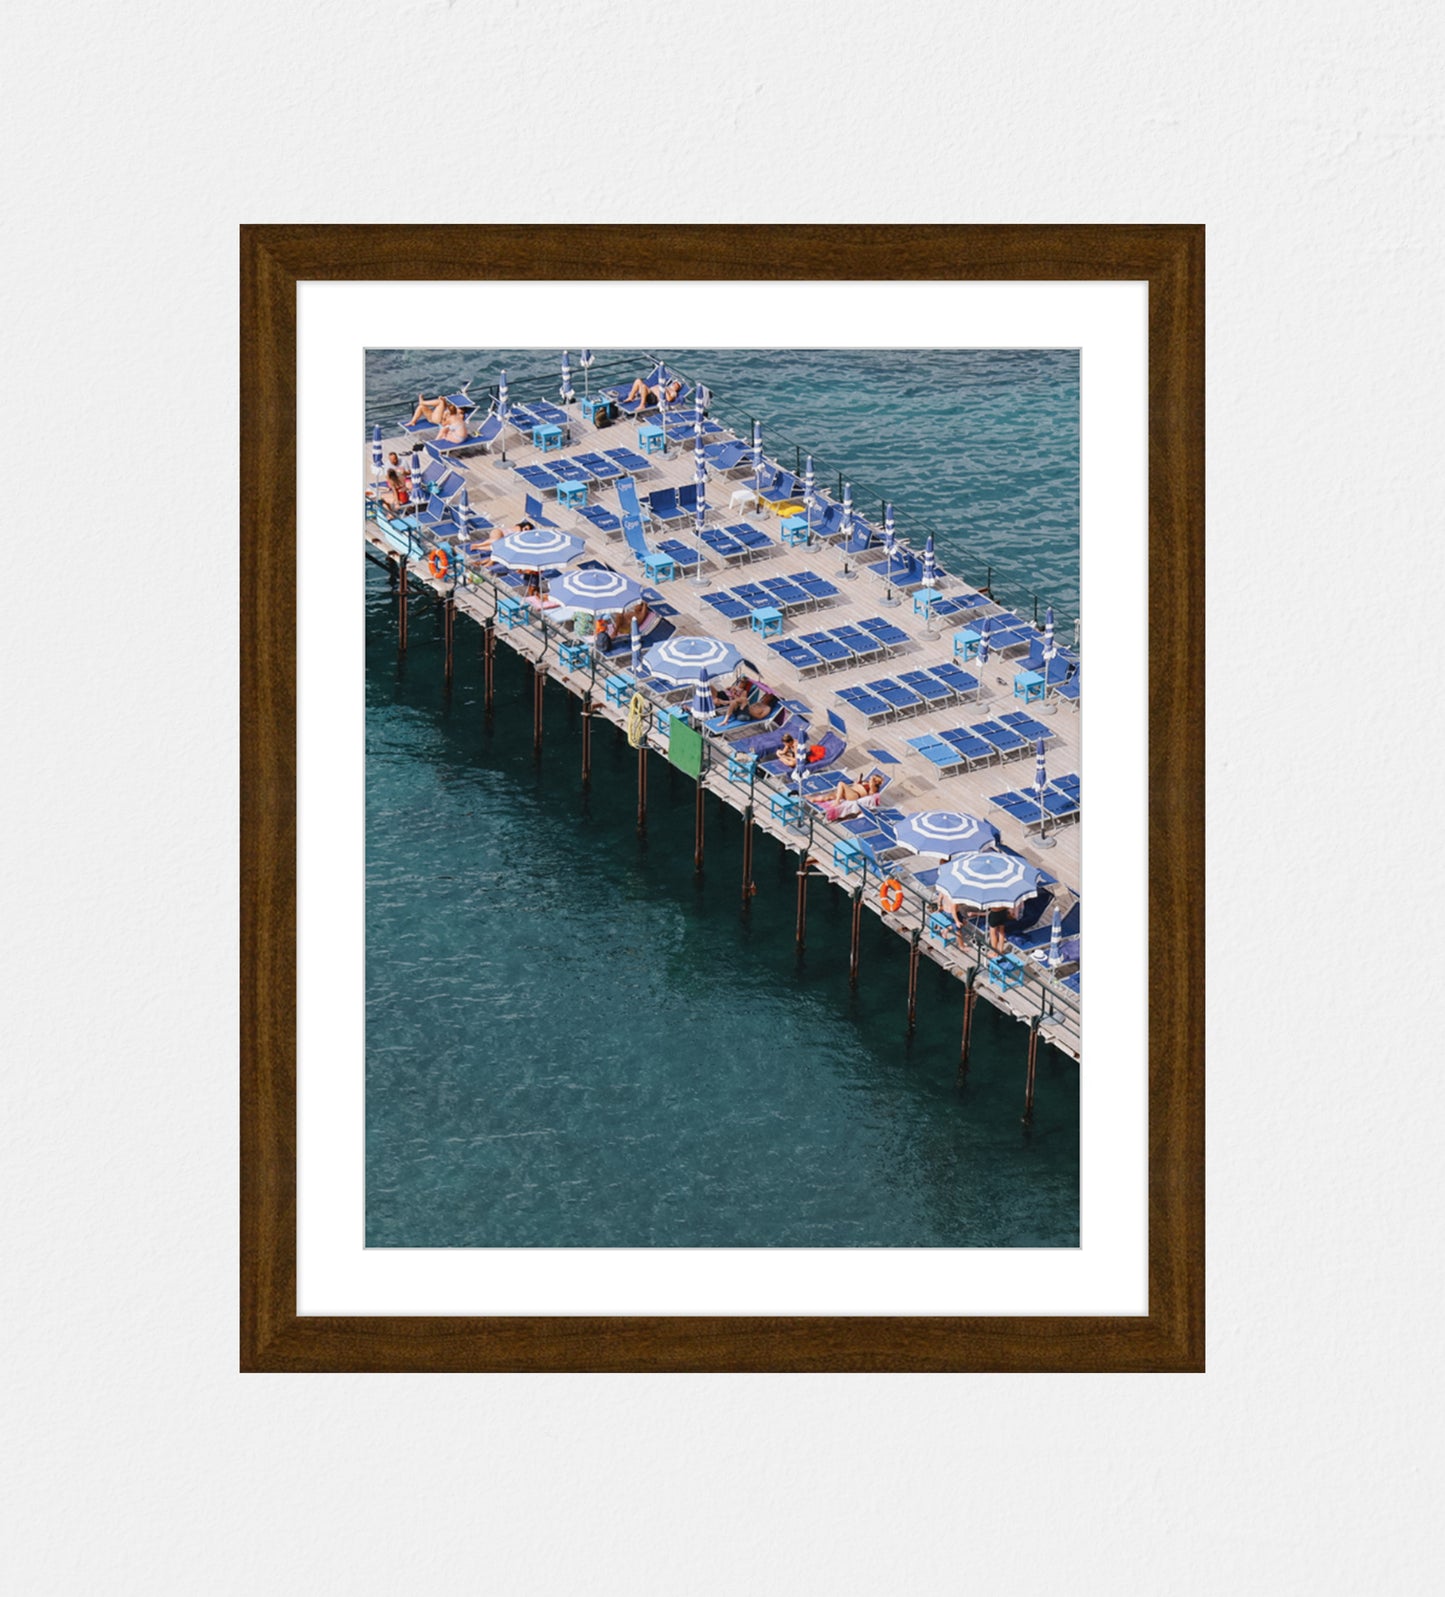 Photo of a pier at an angled shot in Sorrento, Italy. Featuring blue sunbeds and blue and white umbrellas.